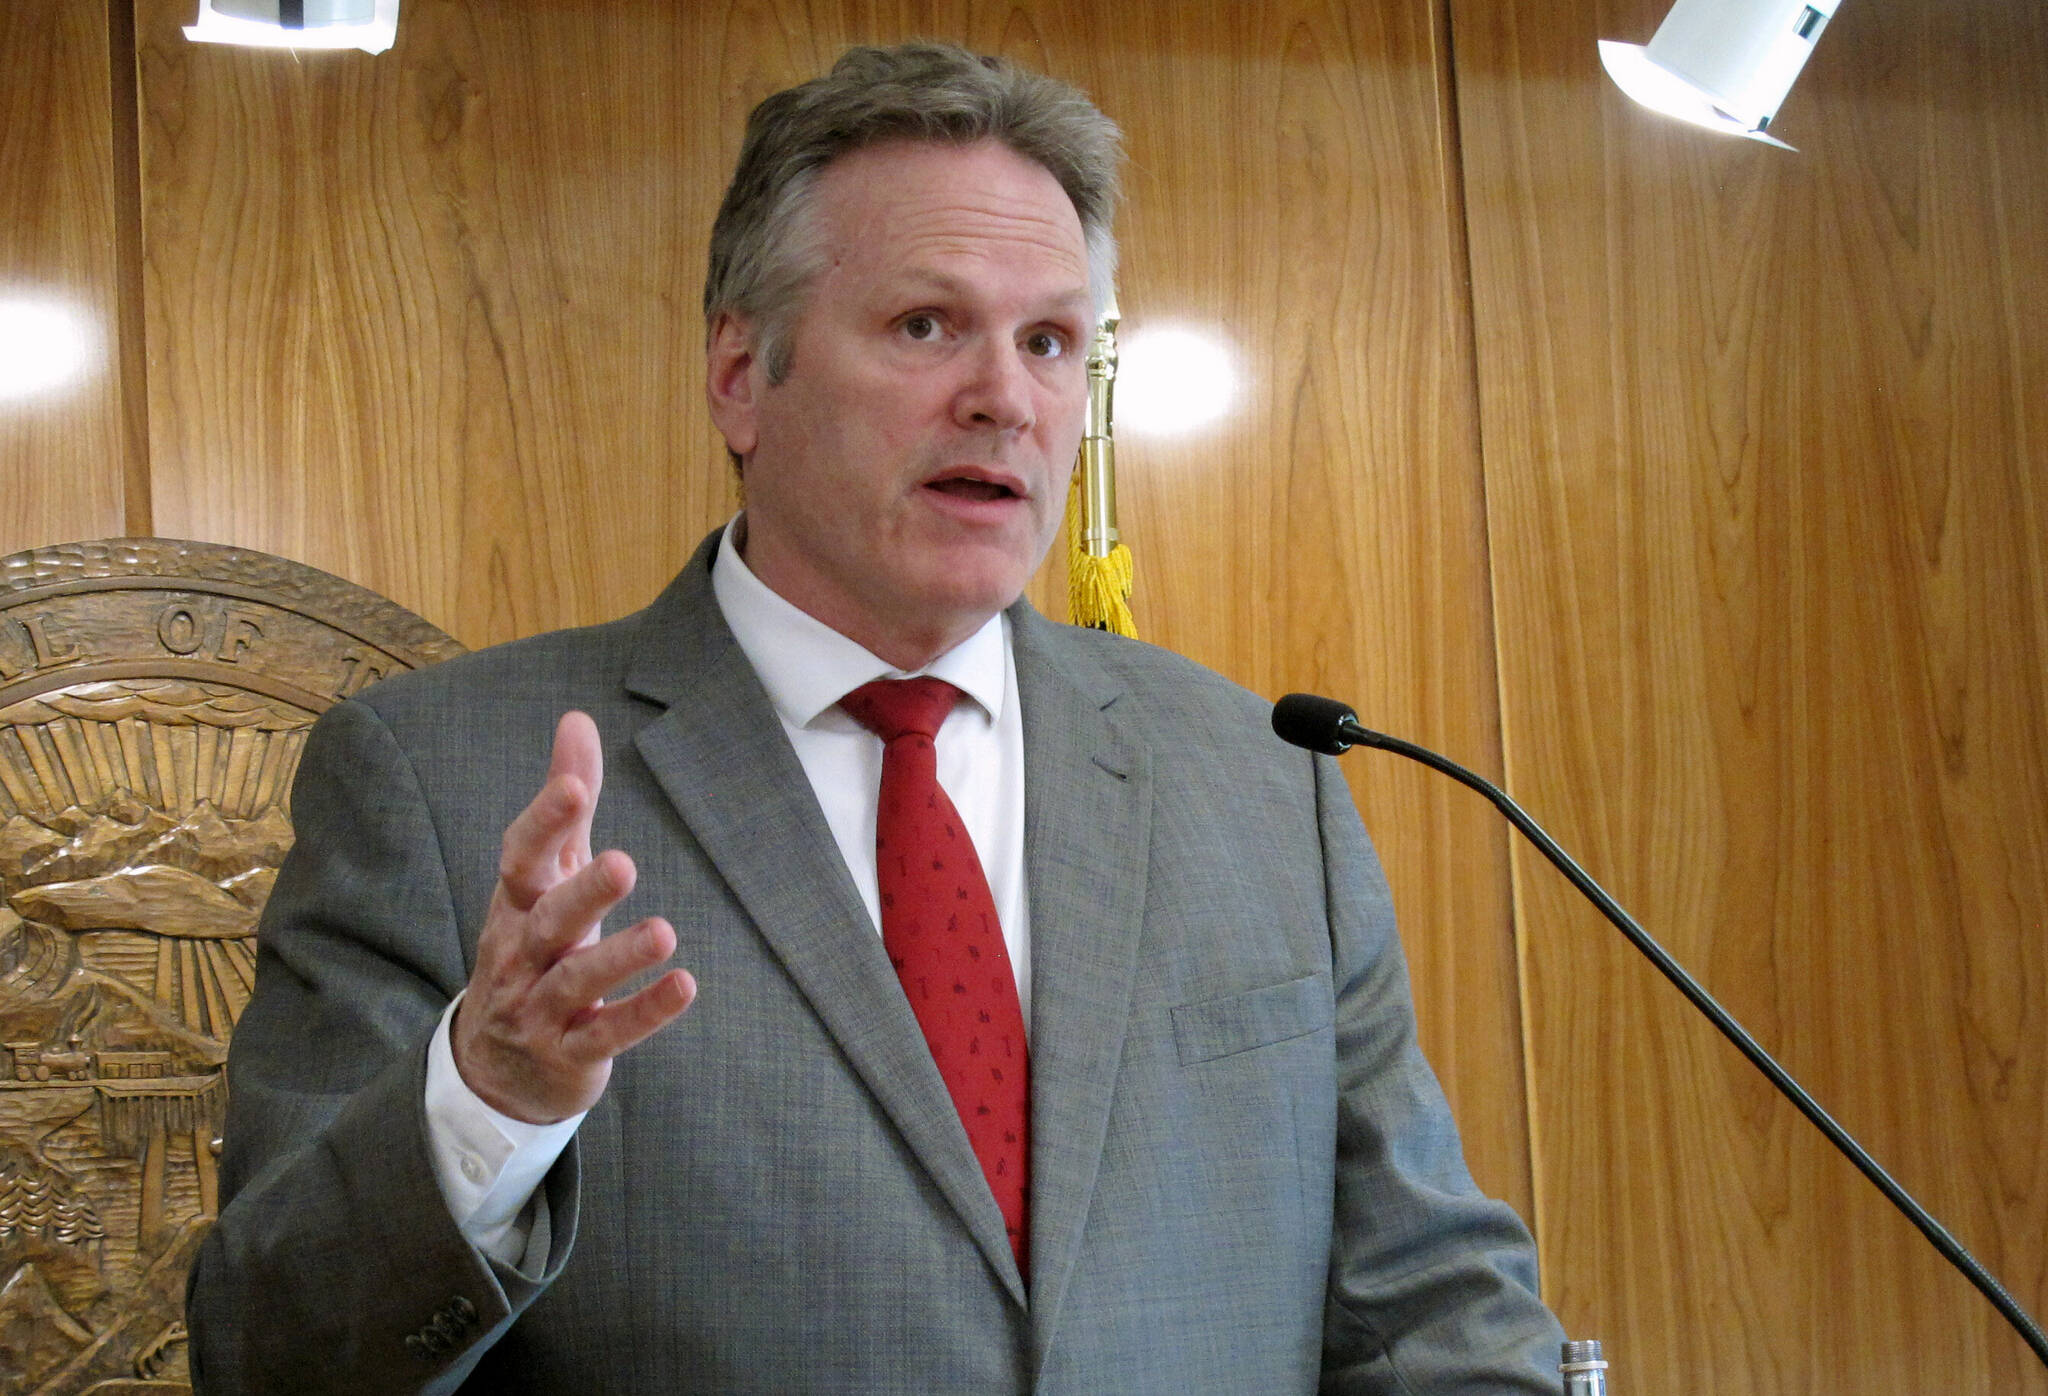 Alaska Gov. Mike Dunleavy speaks to reporters during a news conference at the state Capitol on April 28, 2022, in Juneau, Alaska. Nearly every single Alaskan got a financial windfall amounting to more than $3,000 on Tuesday, Sept. 20, 2022, the day the state began distributing payments from Alaska's investment fund that has been seeded with money from the state's oil riches. (AP Photo/Becky Bohrer, File)